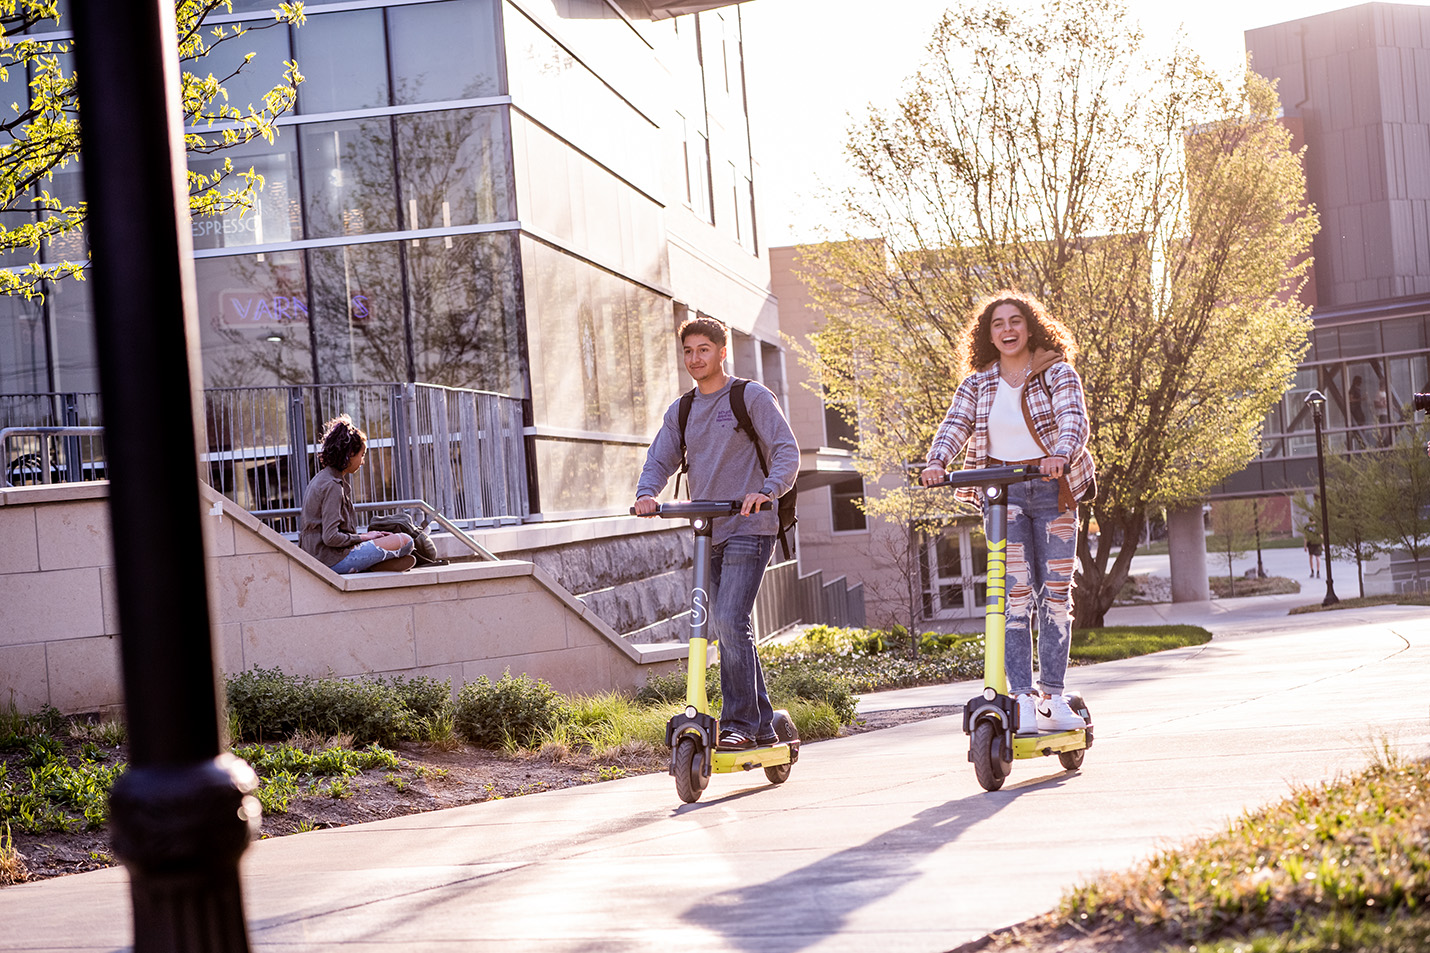 Students riding scooters on campus